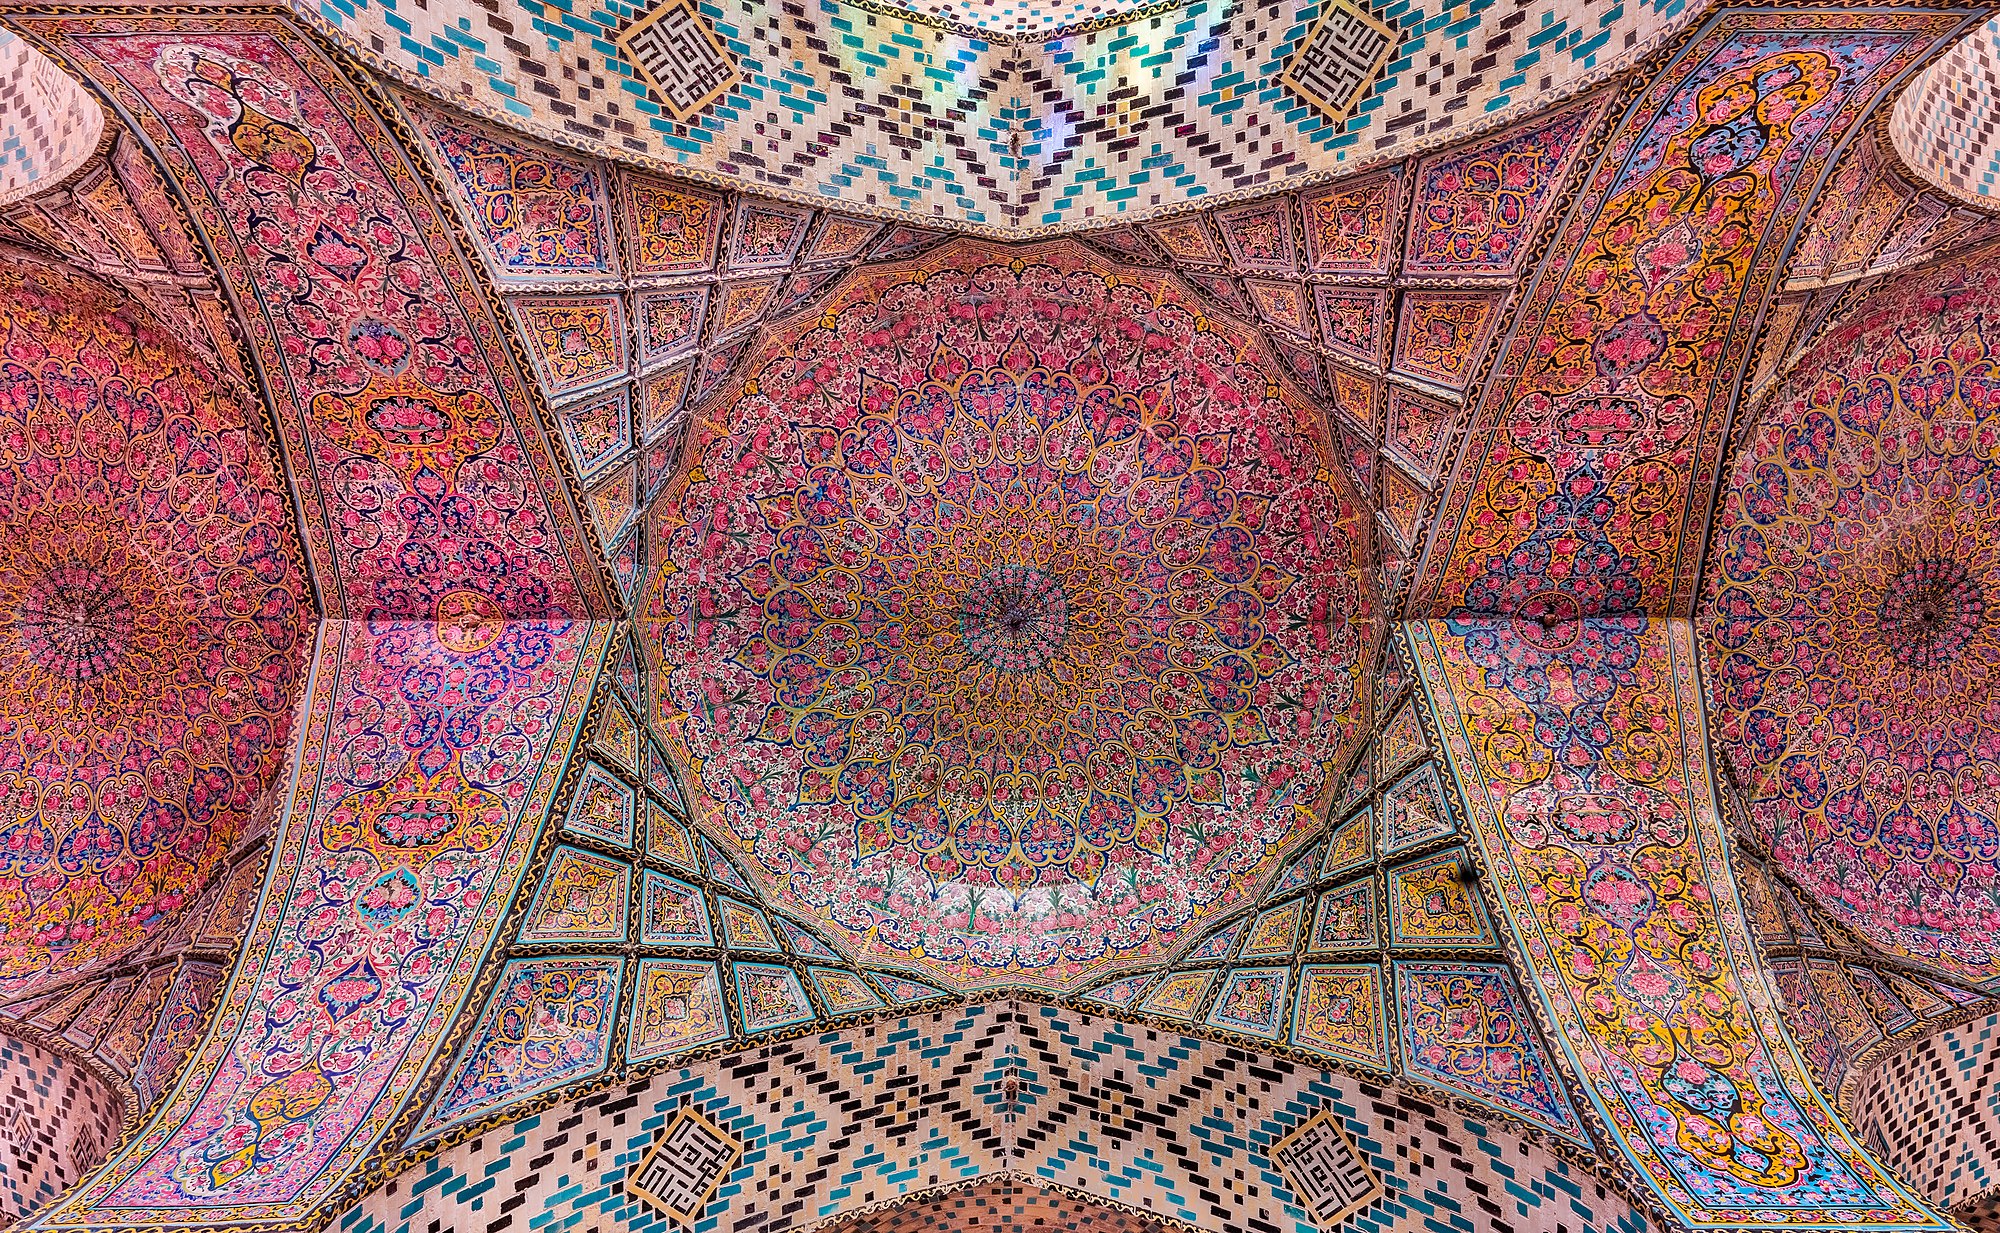 View of the ceiling in the interior of the Nasir-ol-Molk Mosque, also known as the Pink Mosque, is a traditional mosque located in Shiraz district of Gowad-e-Arabān, Iran. The mosque was built from 1876 to 1888, by the order of Mirzā Hasan Ali (Nasir ol Molk), a Qajar ruler.